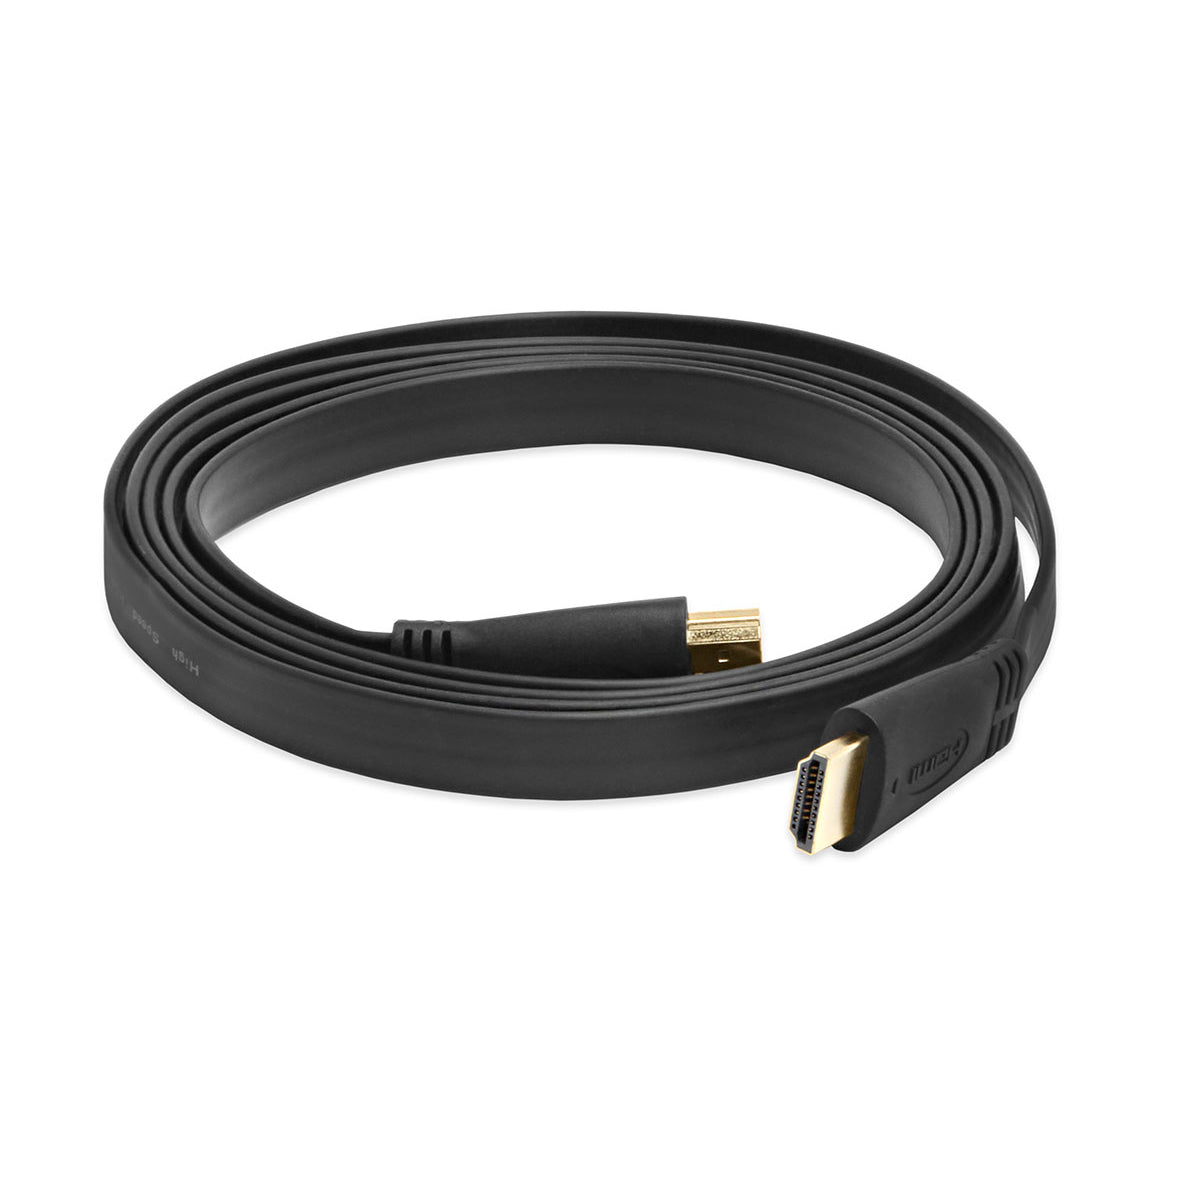 HDMI 4k 5m Flat Cable with Ethernet